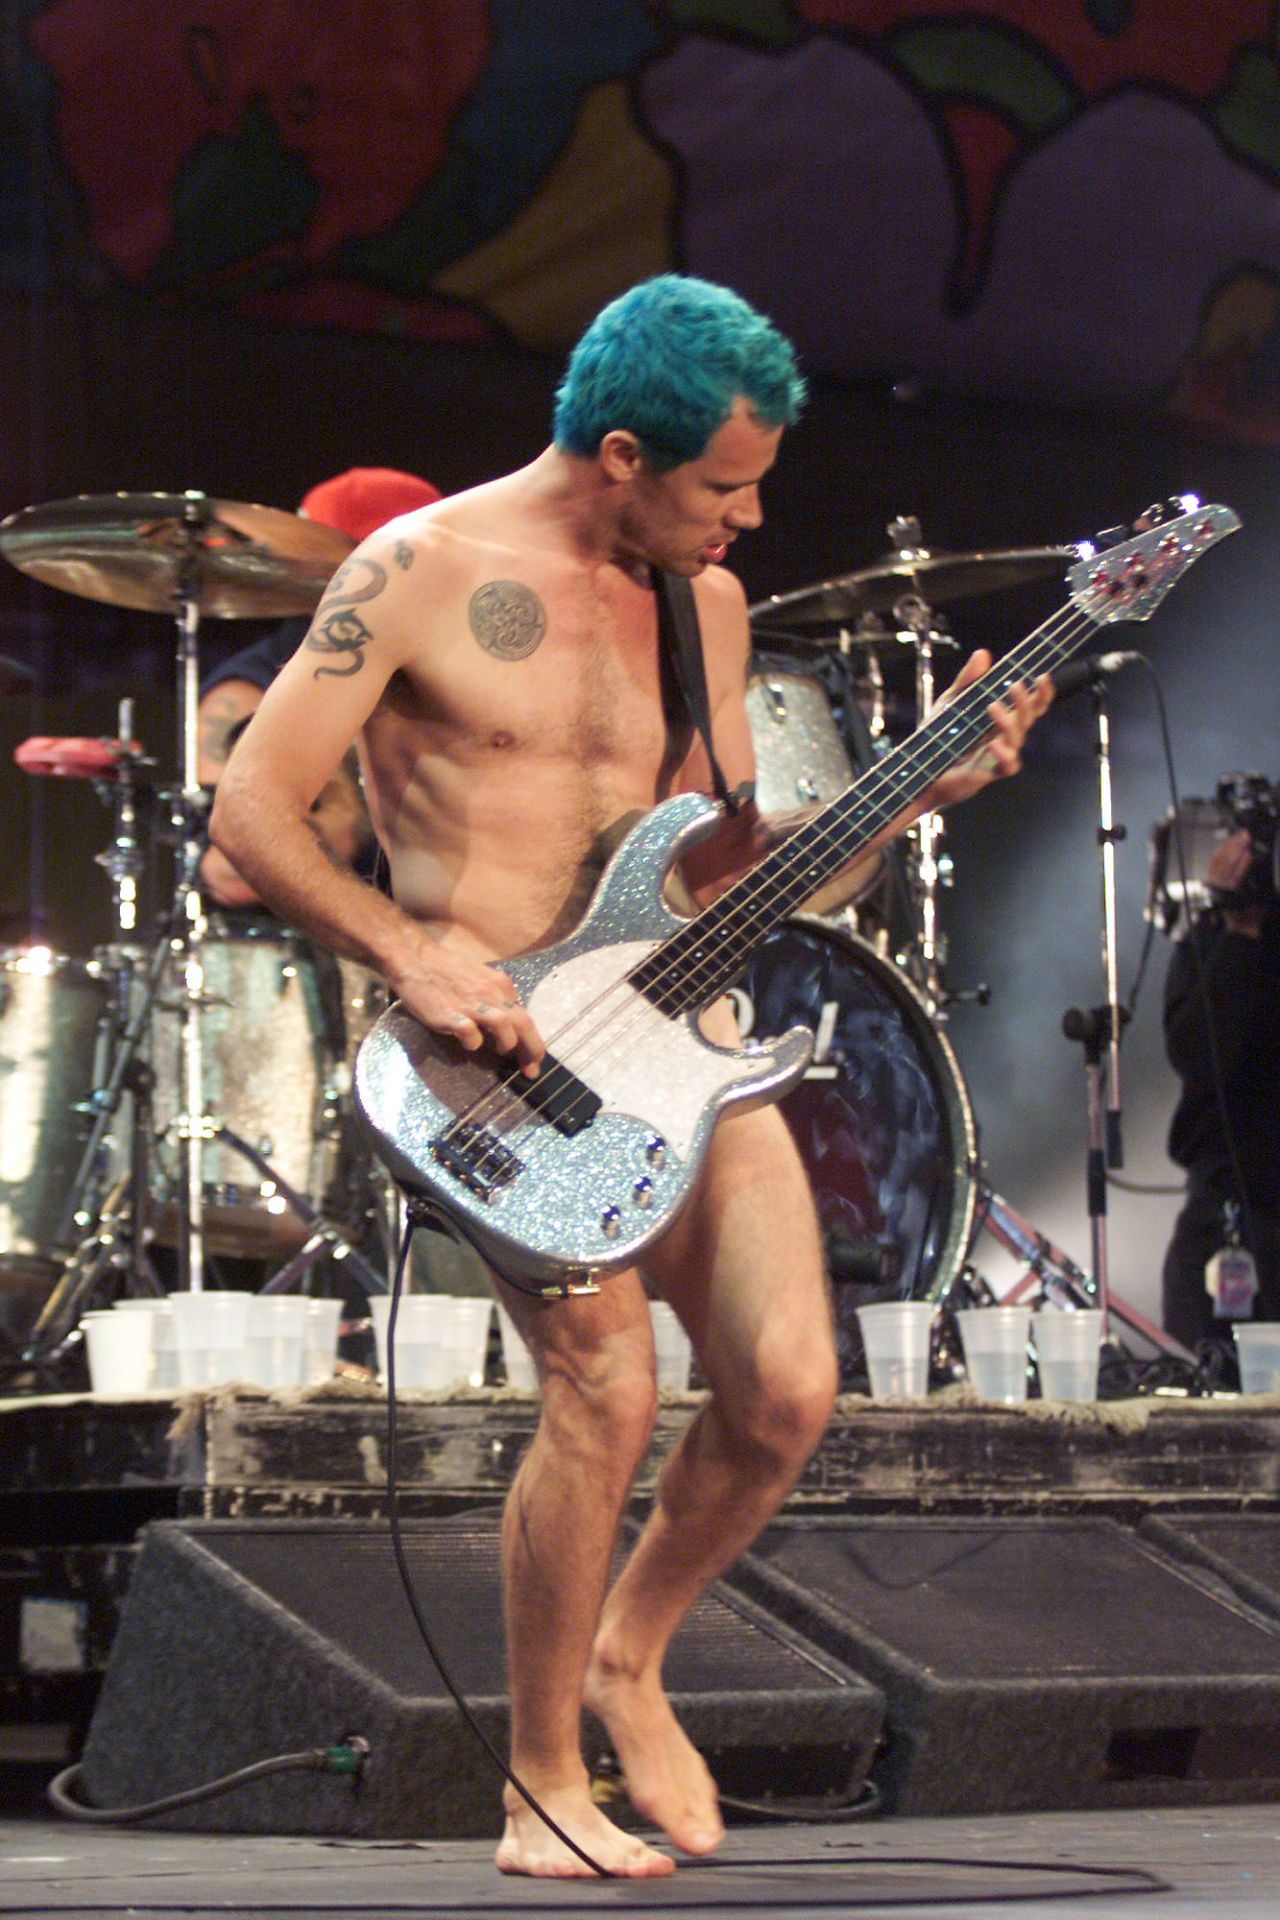 Red Hot Chili Peppers bassist Flea, whose real name is Michael Balzary, performs nude at Woodstock '99, a summer musical held in Rome, New York, as a tribute to its 1969 namesake.